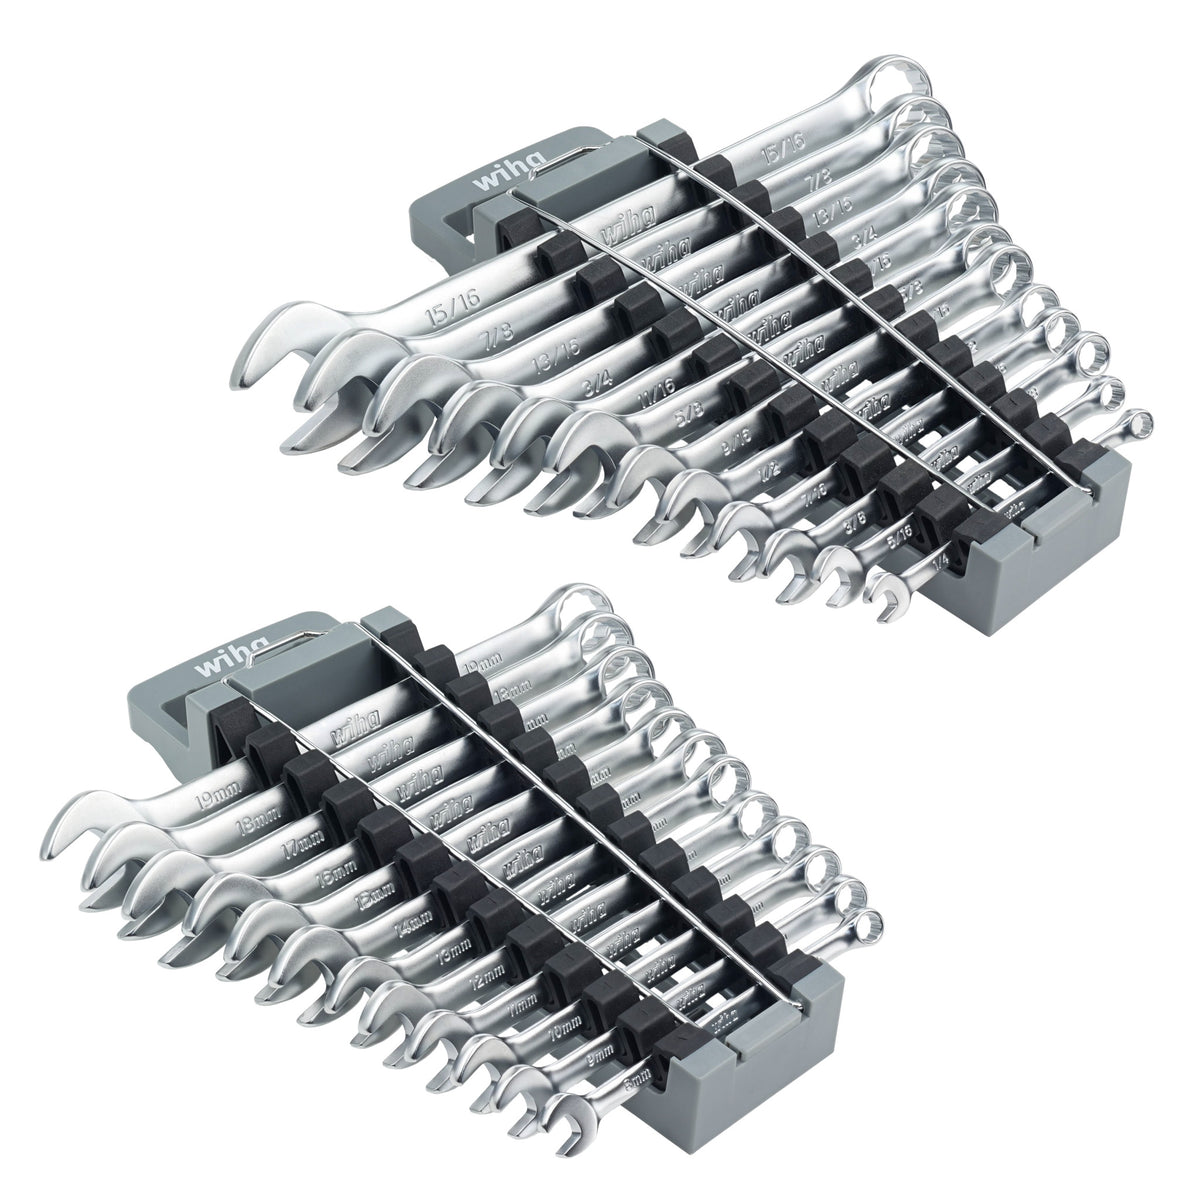 24 Piece Combination Wrench Set - Metric and SAE